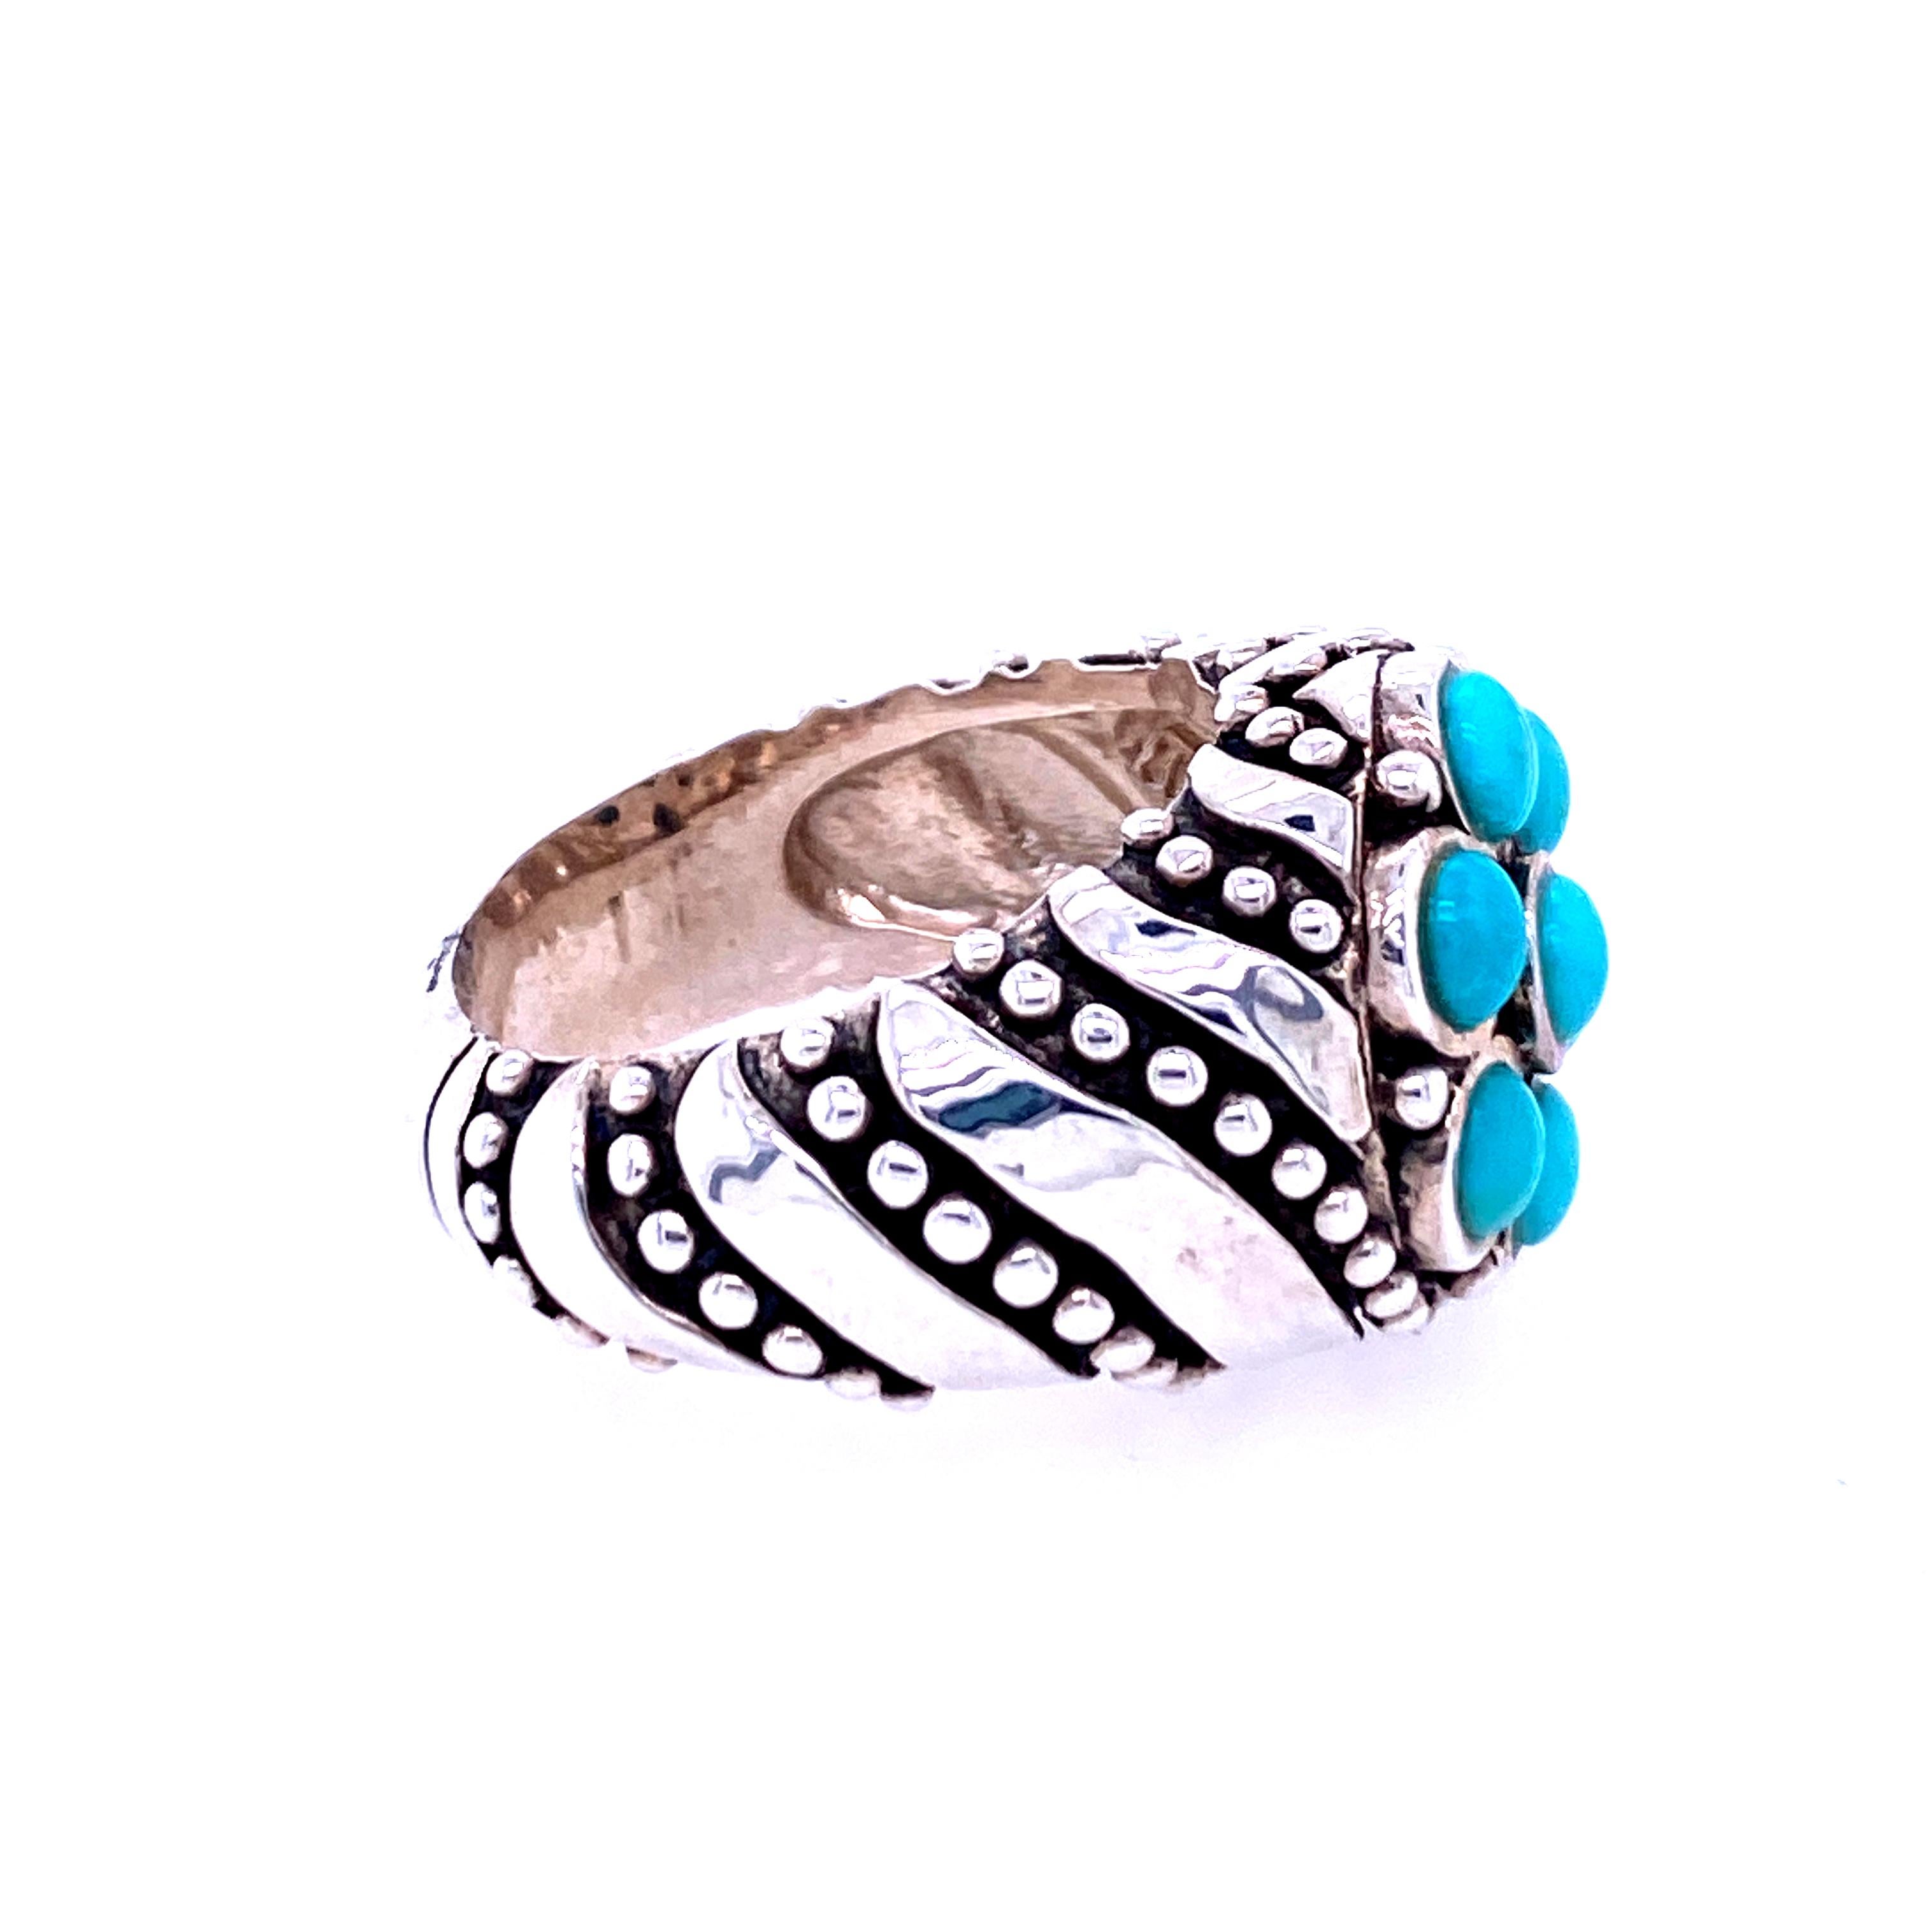 One sterling silver (stamped 925)  ring, featuring seven round 3.8mm turquoise stones.  The ring measures 15.8mm wide and the shank tapers to 6.5mm at the base.  The ring is a finger size 8.75.